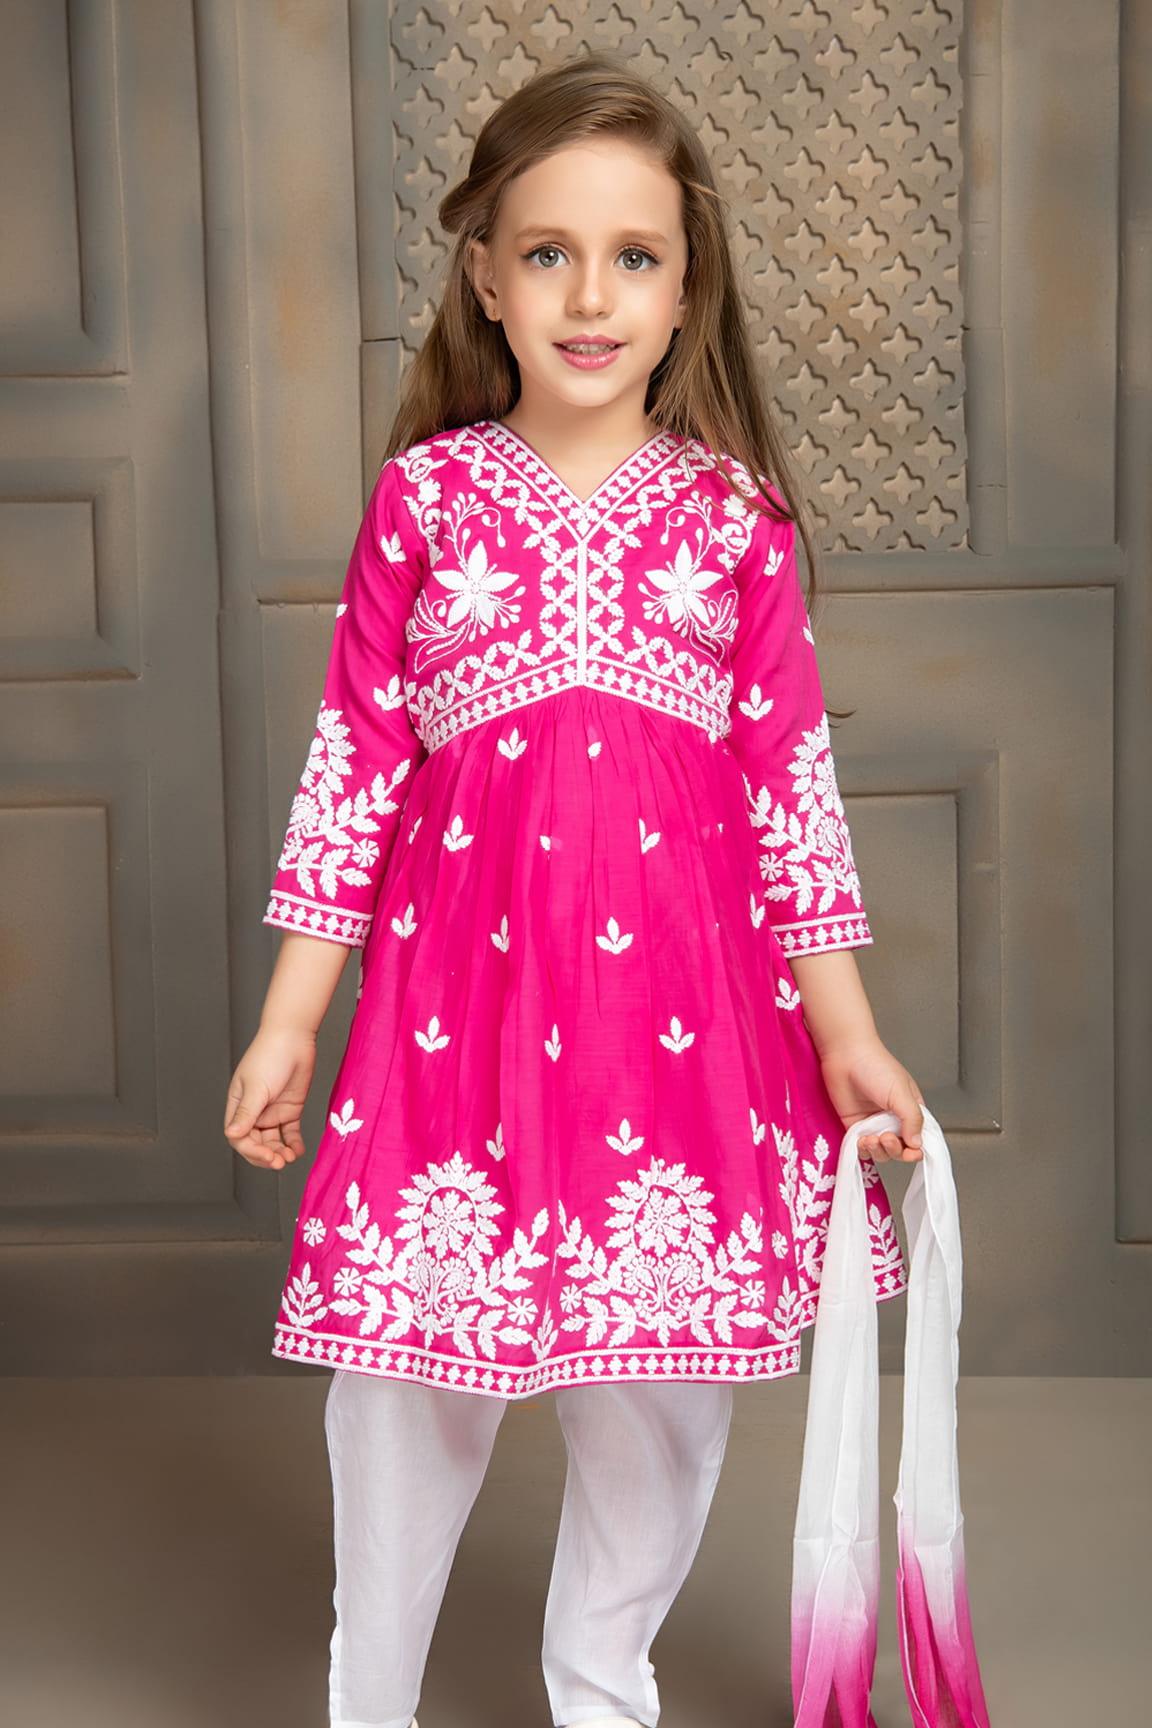 Pink Salwar Set With White Embroidery For Girls - Lagorii Kids